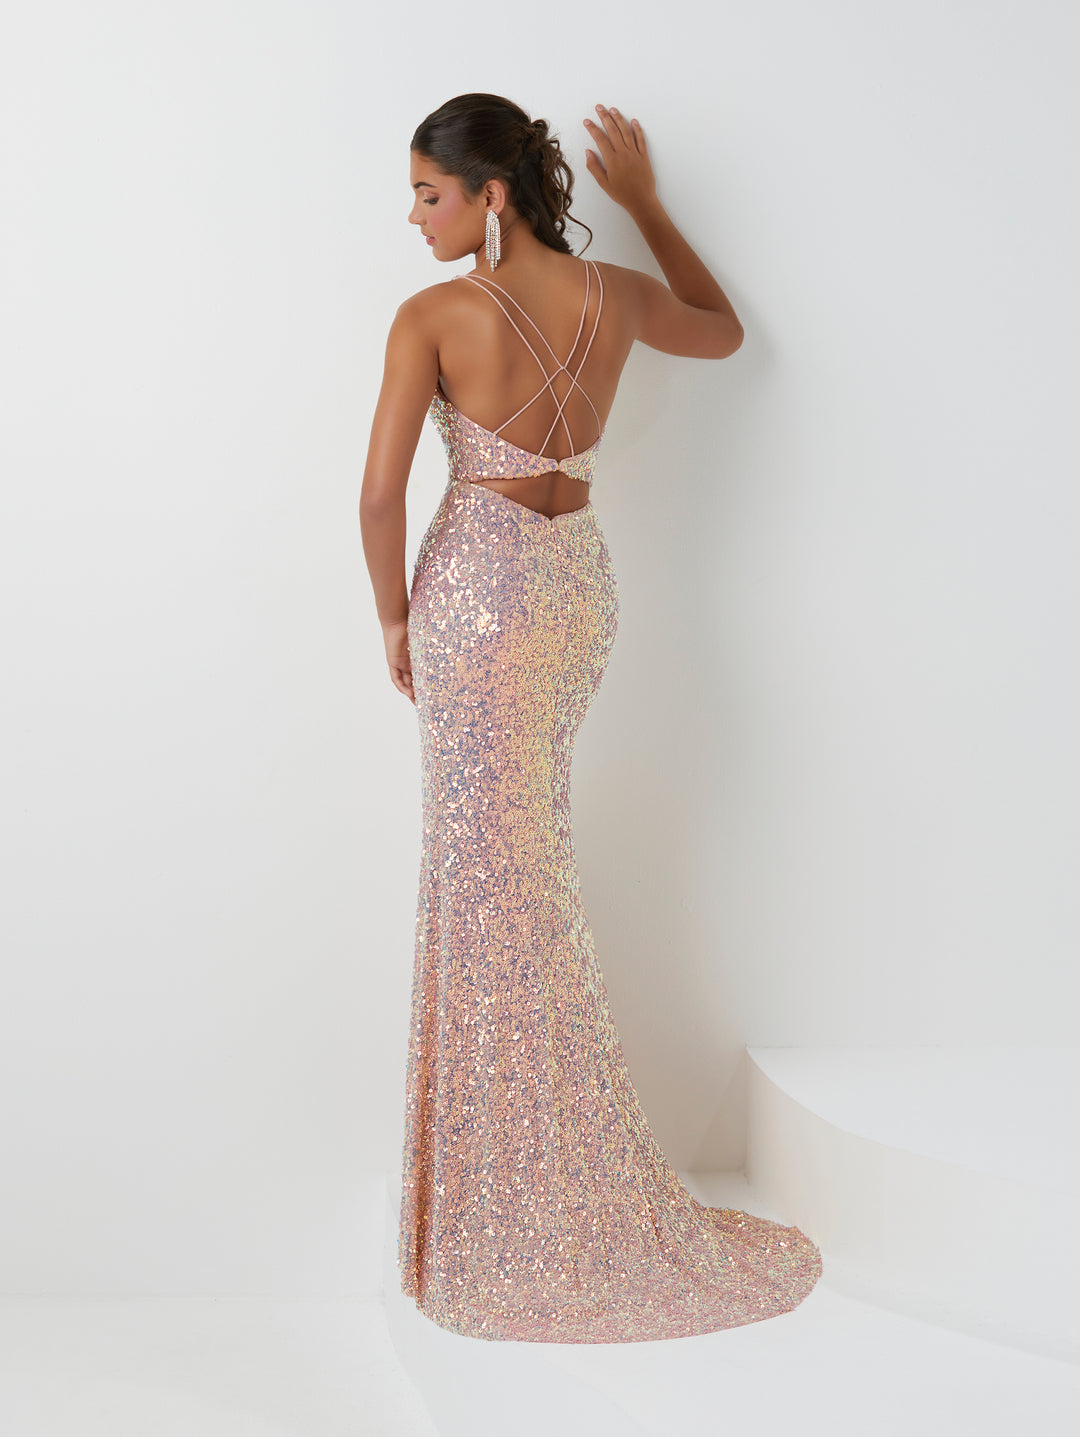 Fitted Sequin Strappy Back Slit Gown by Tiffany Designs 16921